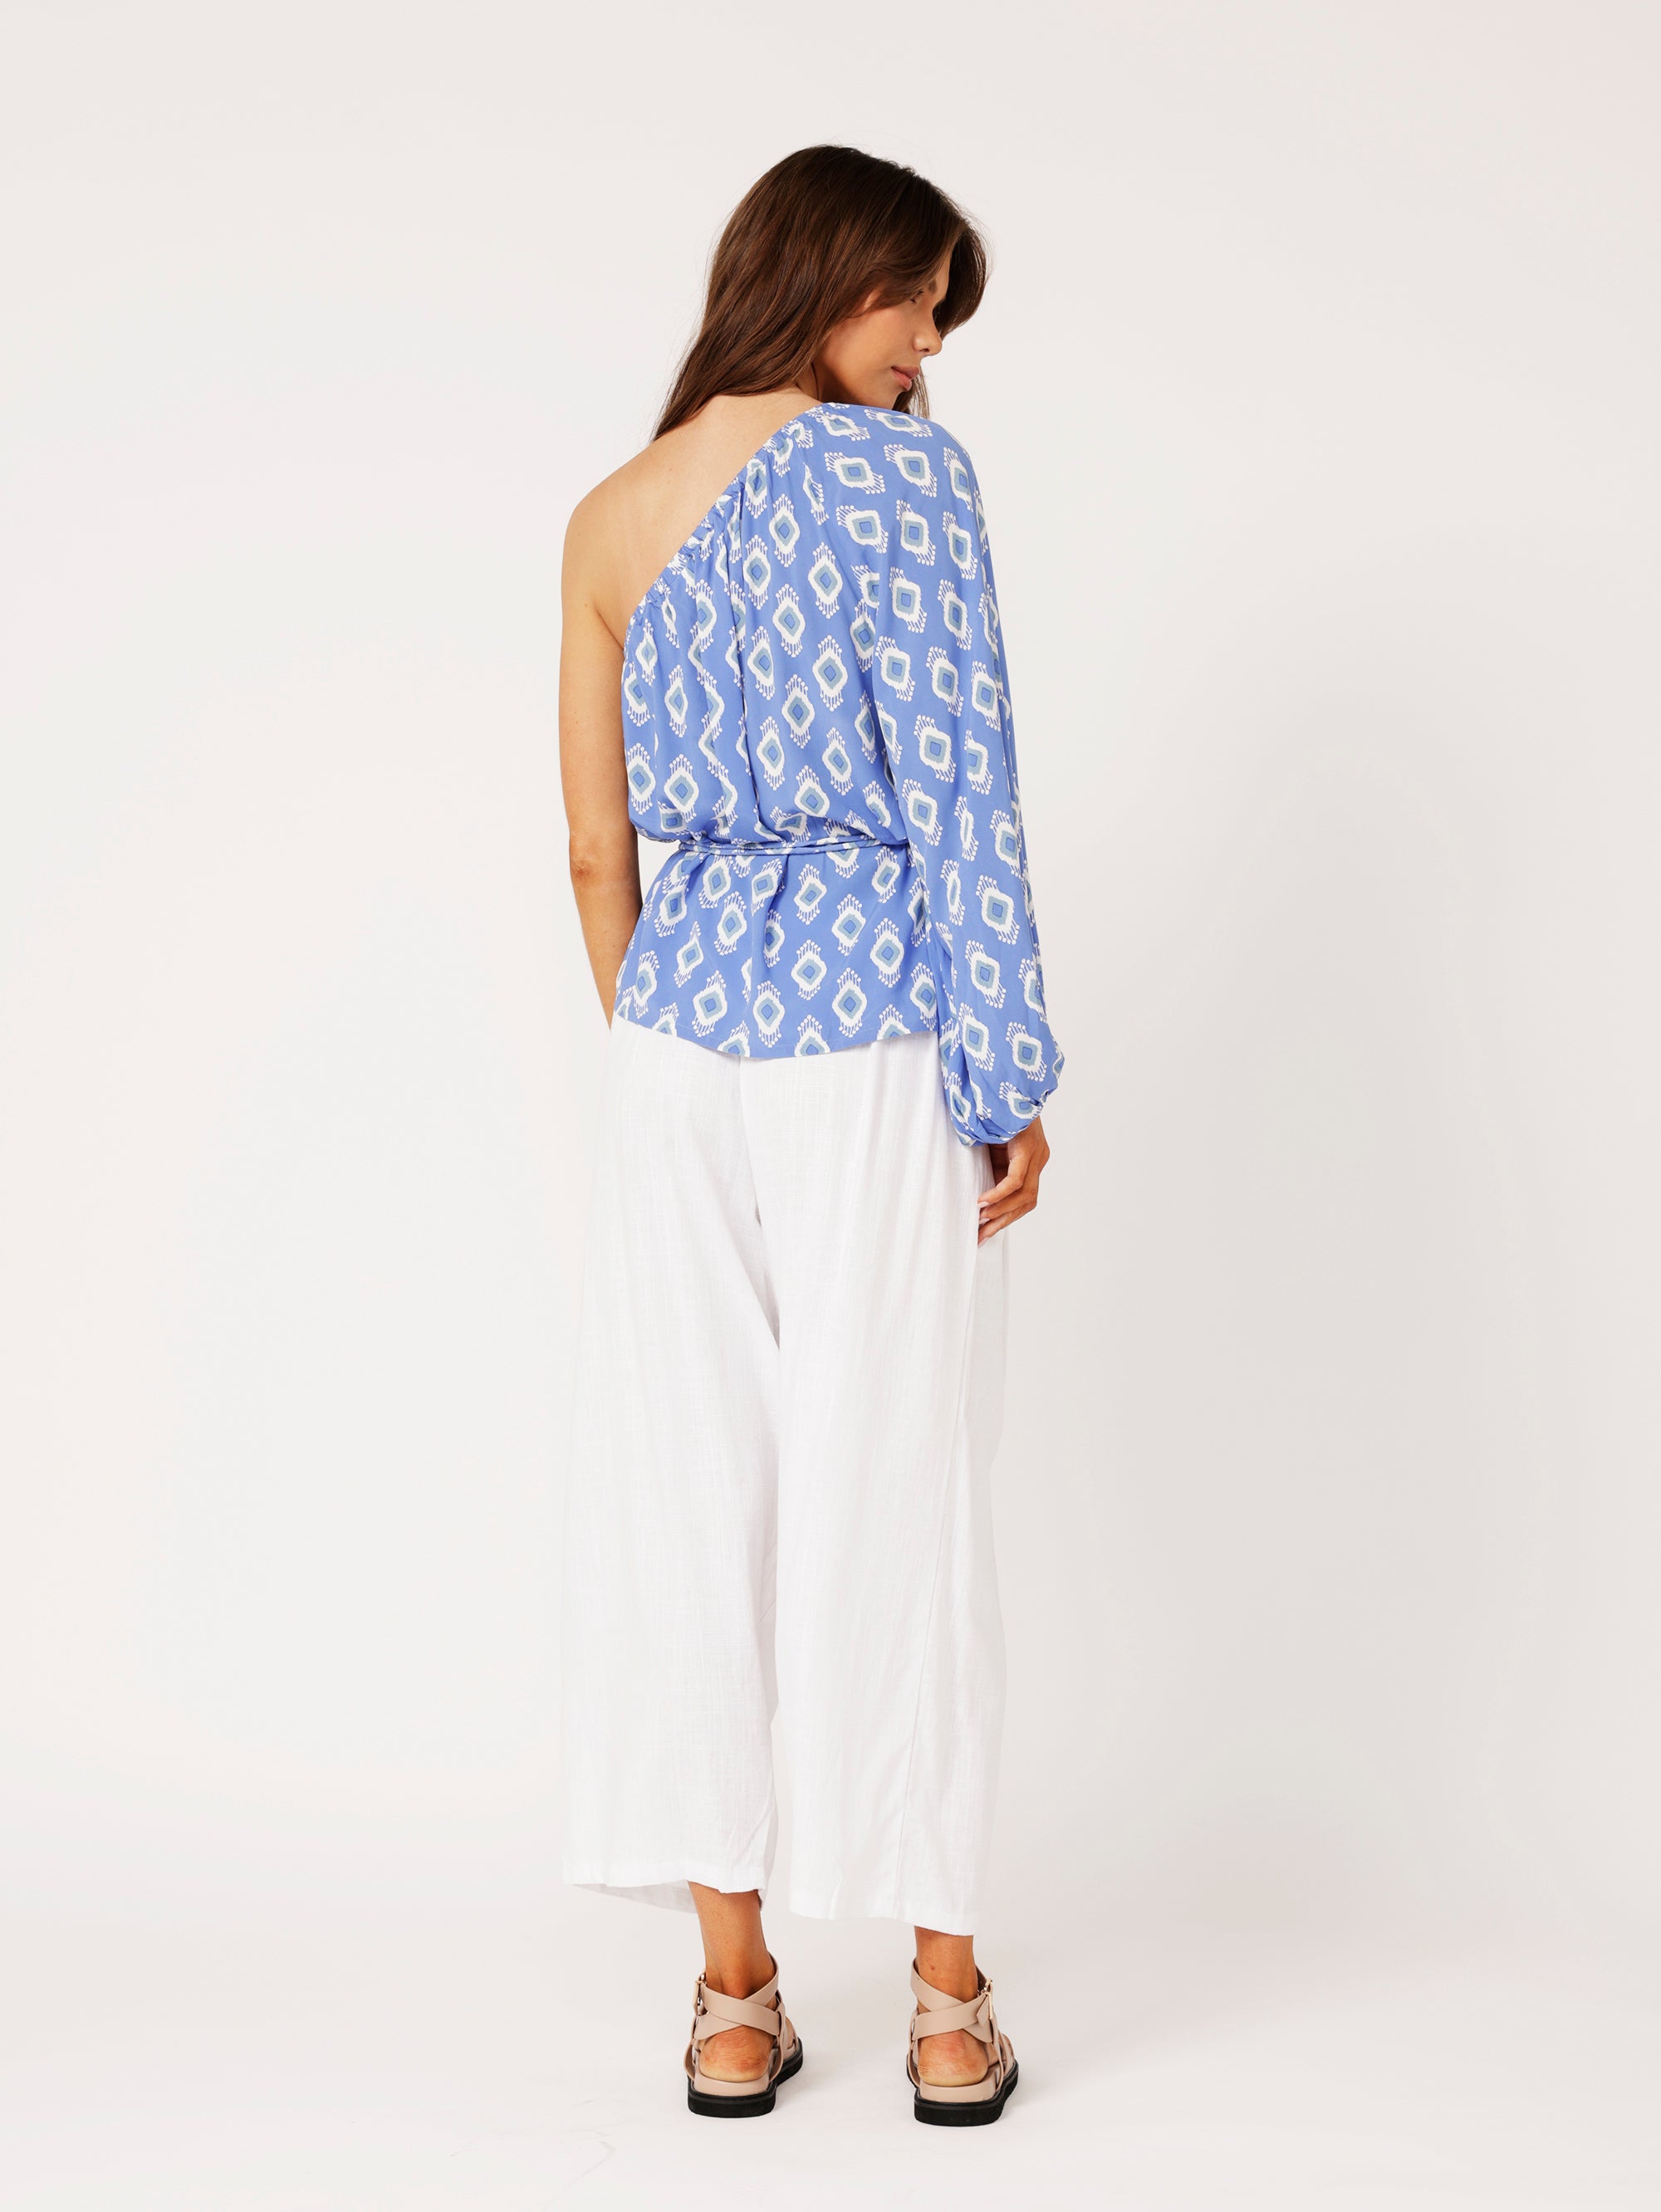 Monte Carlo Top | All Eyes on You Blue - Saffron Road